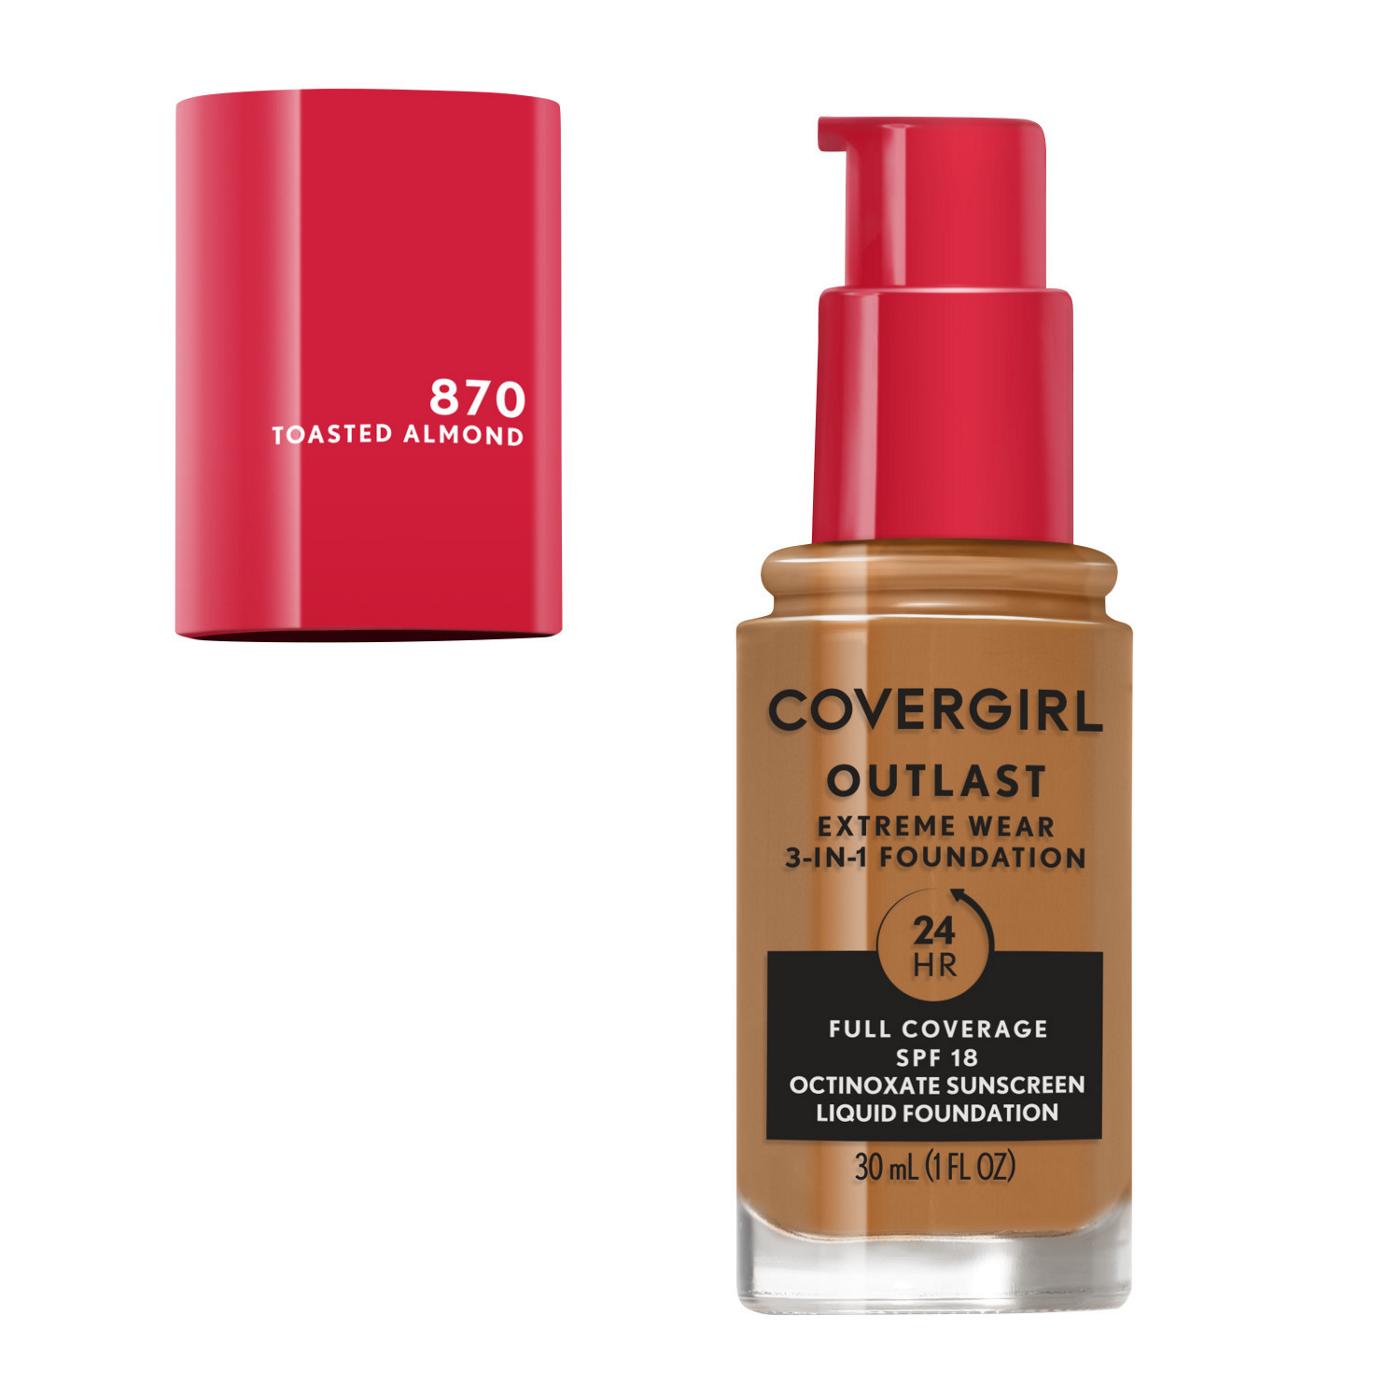 Covergirl Outlast Extreme Wear Liquid Foundation 870 Toasted Almond; image 6 of 11